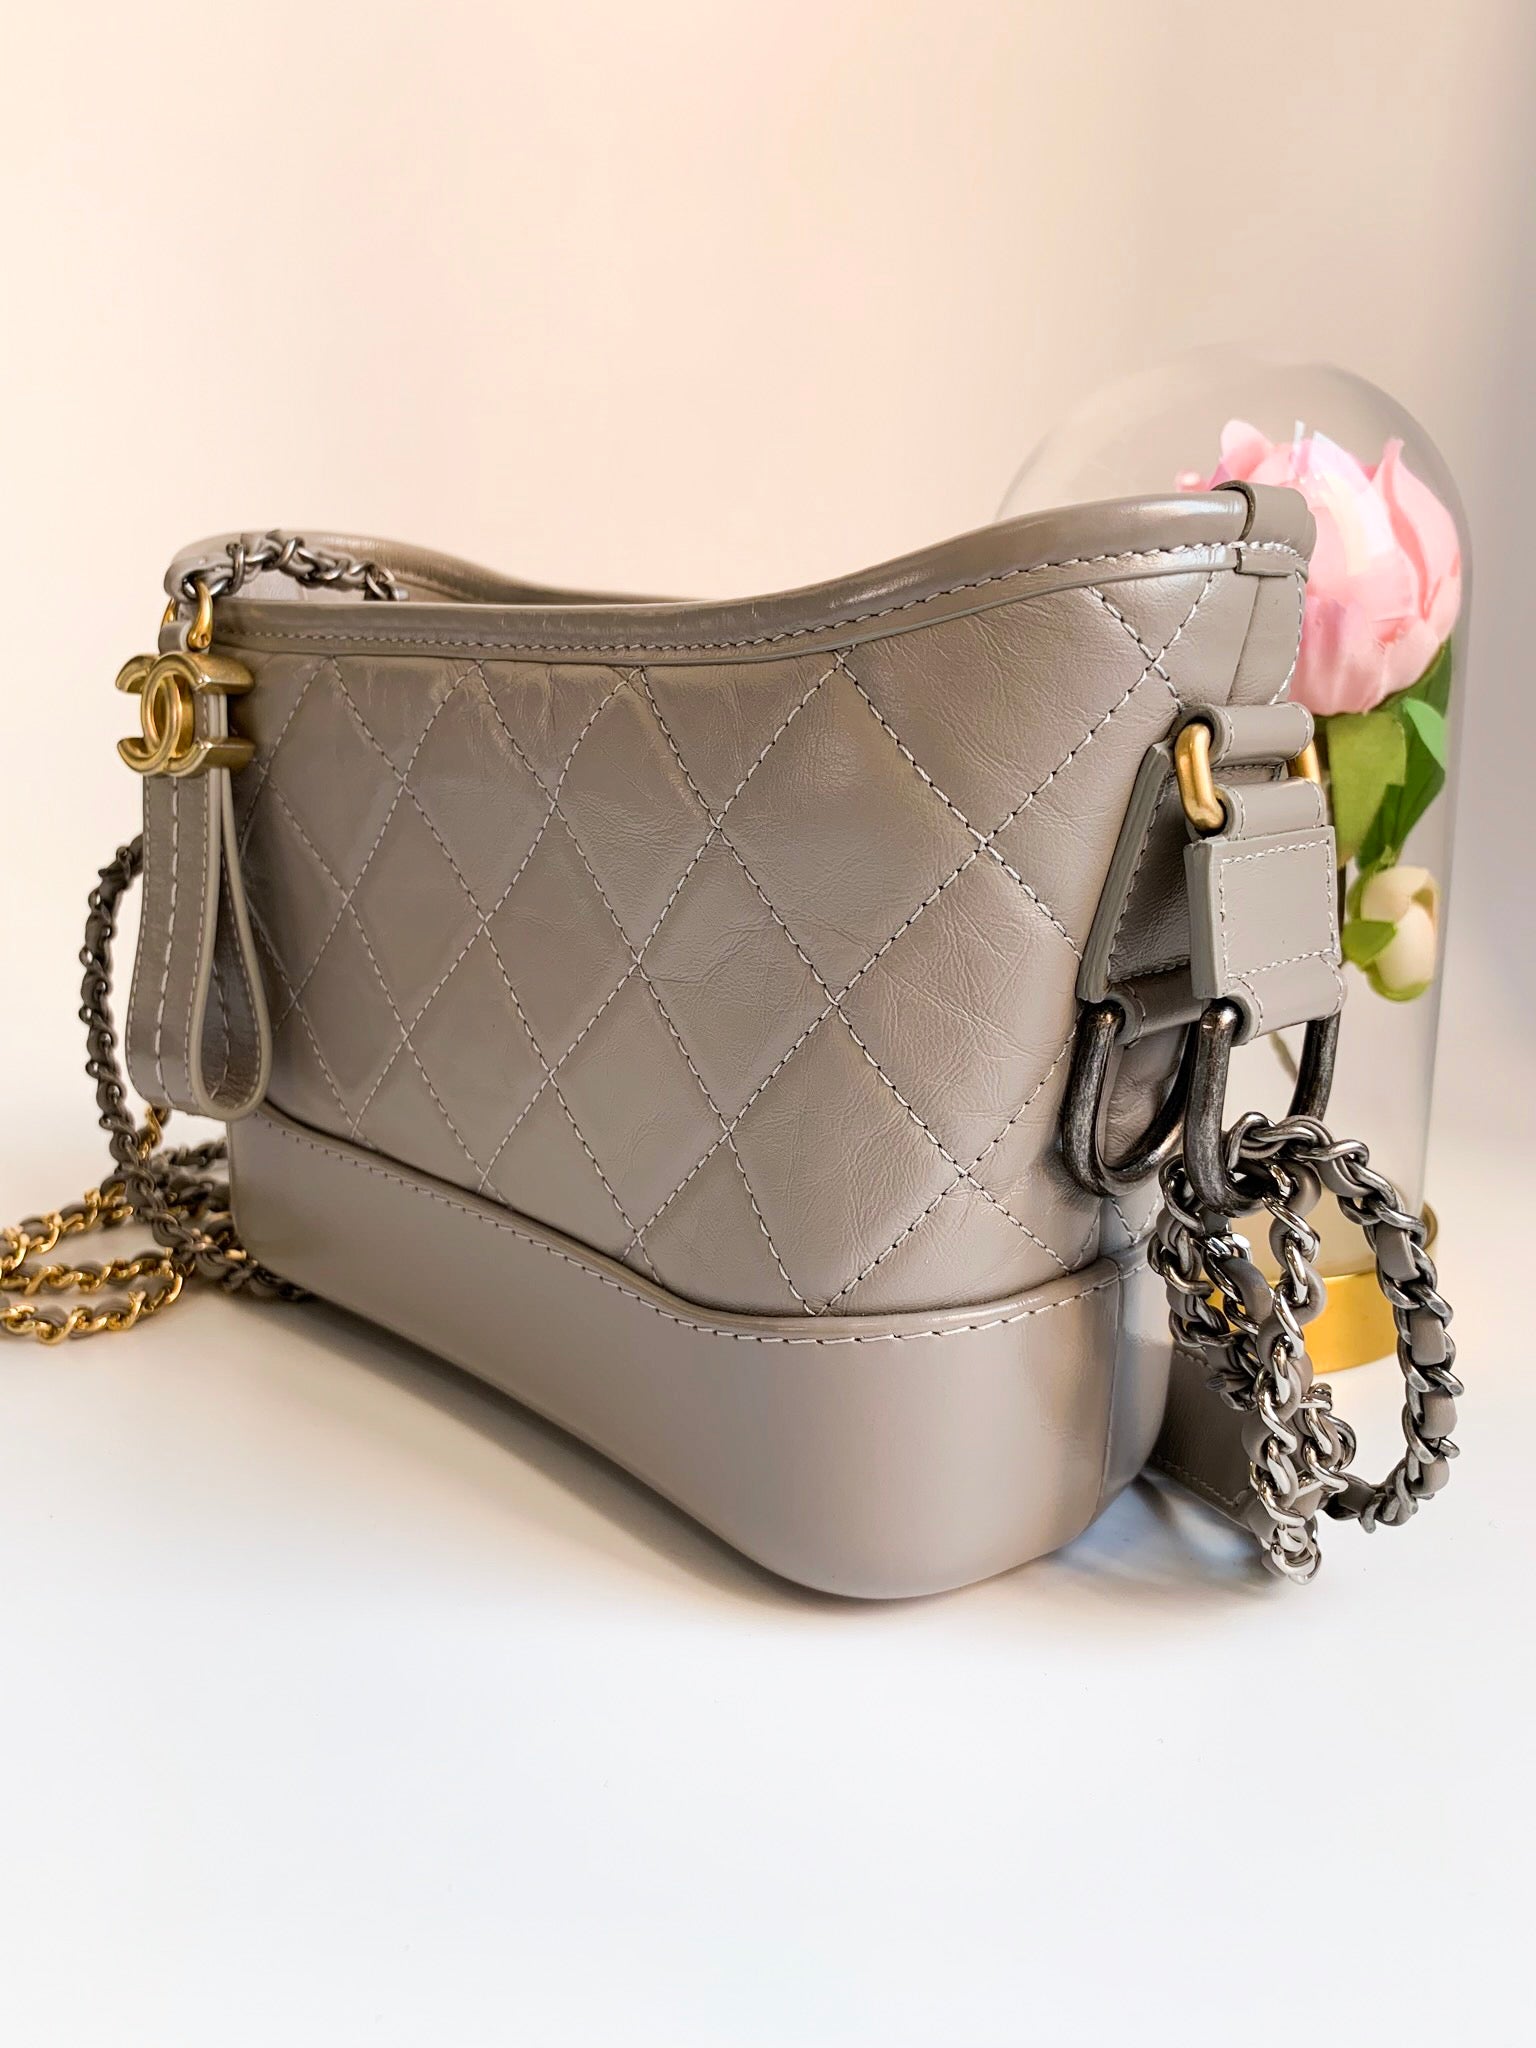 Gabrielle CHANEL Bag taupe leather For Sale at 1stDibs